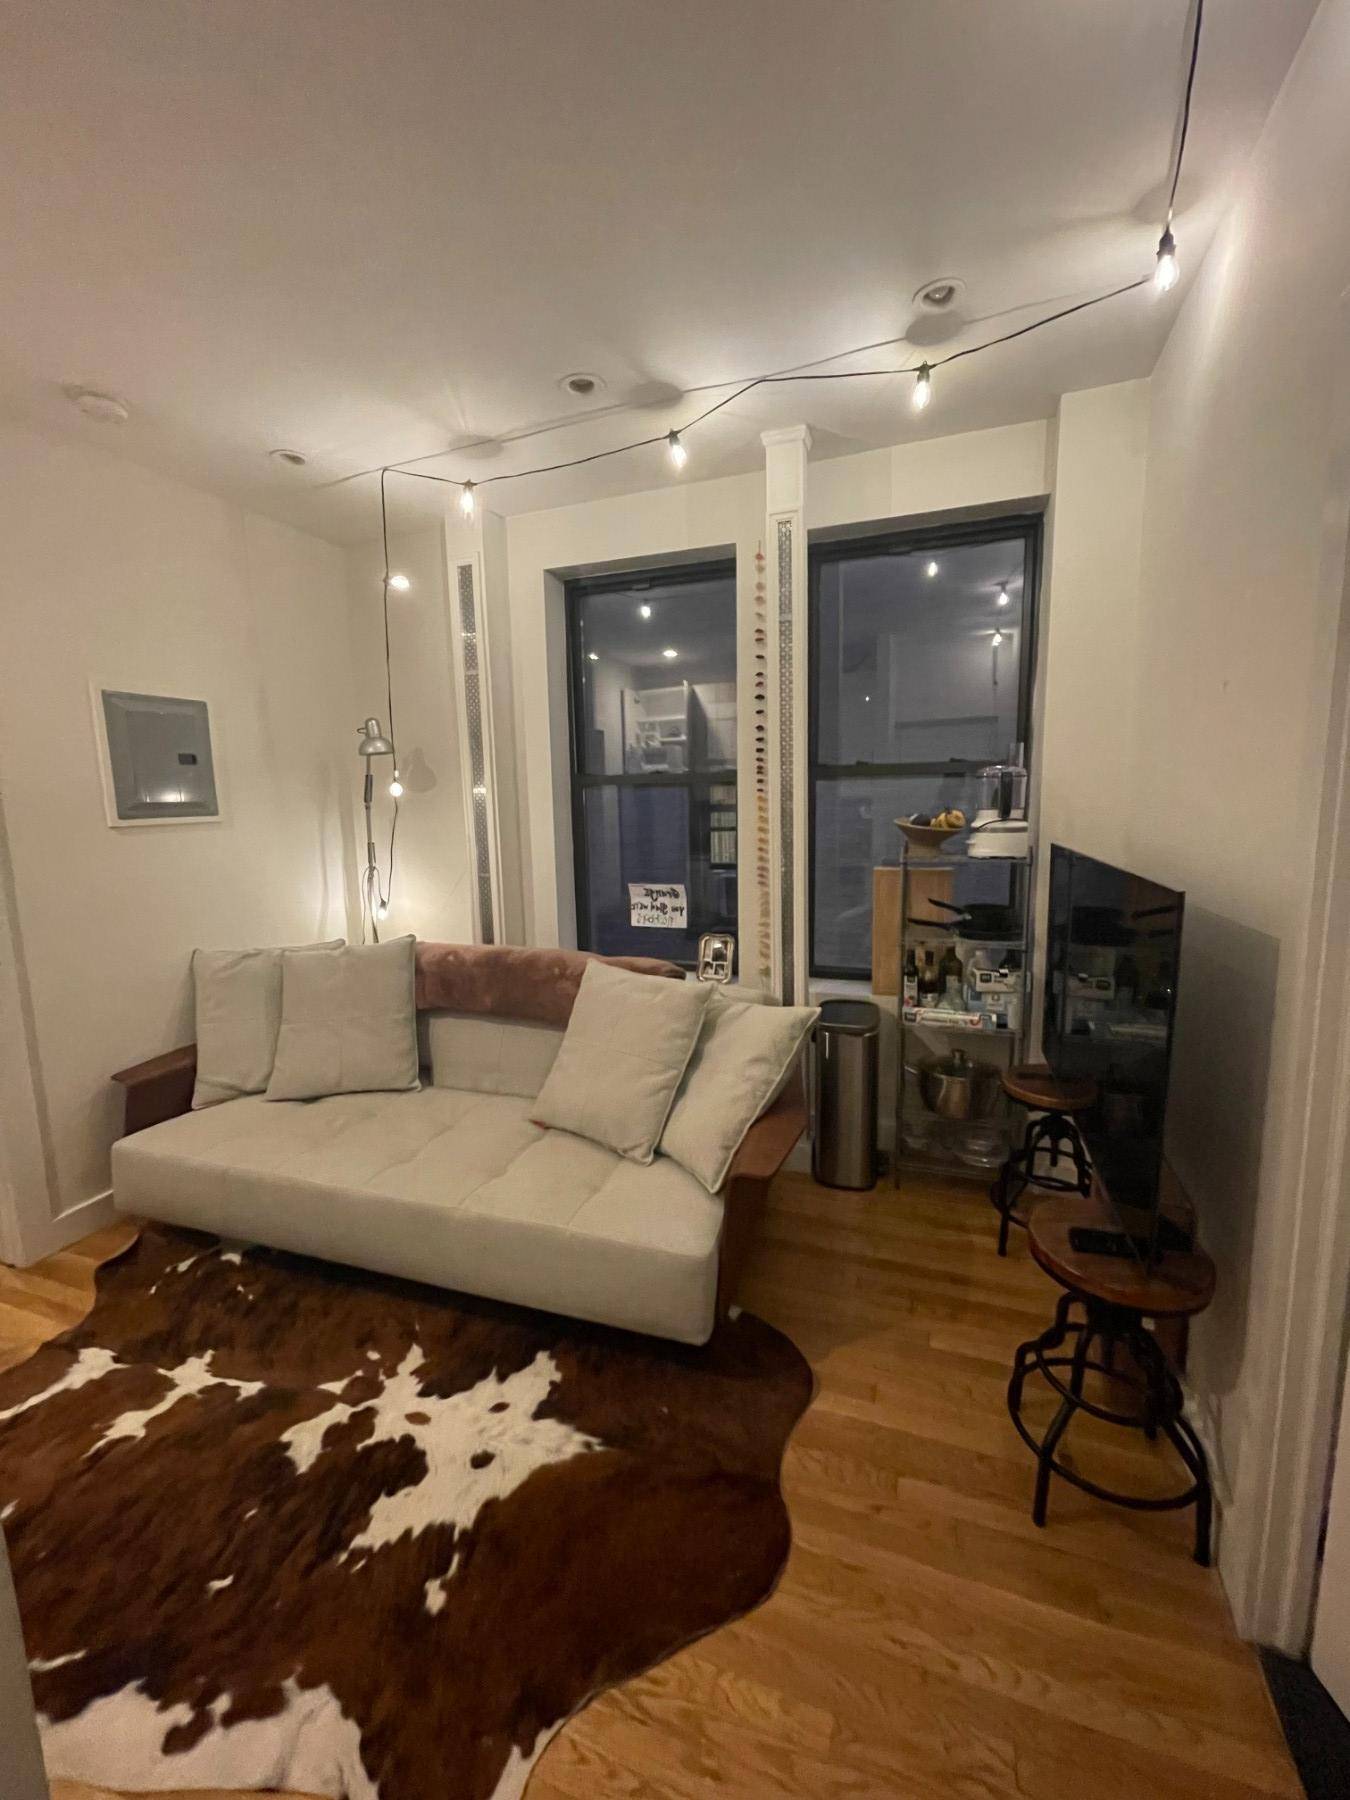 Gut renovated large true 1 bedroom with a washer dryer in unit, top of the line stainless steel appliances and a large bedroom !